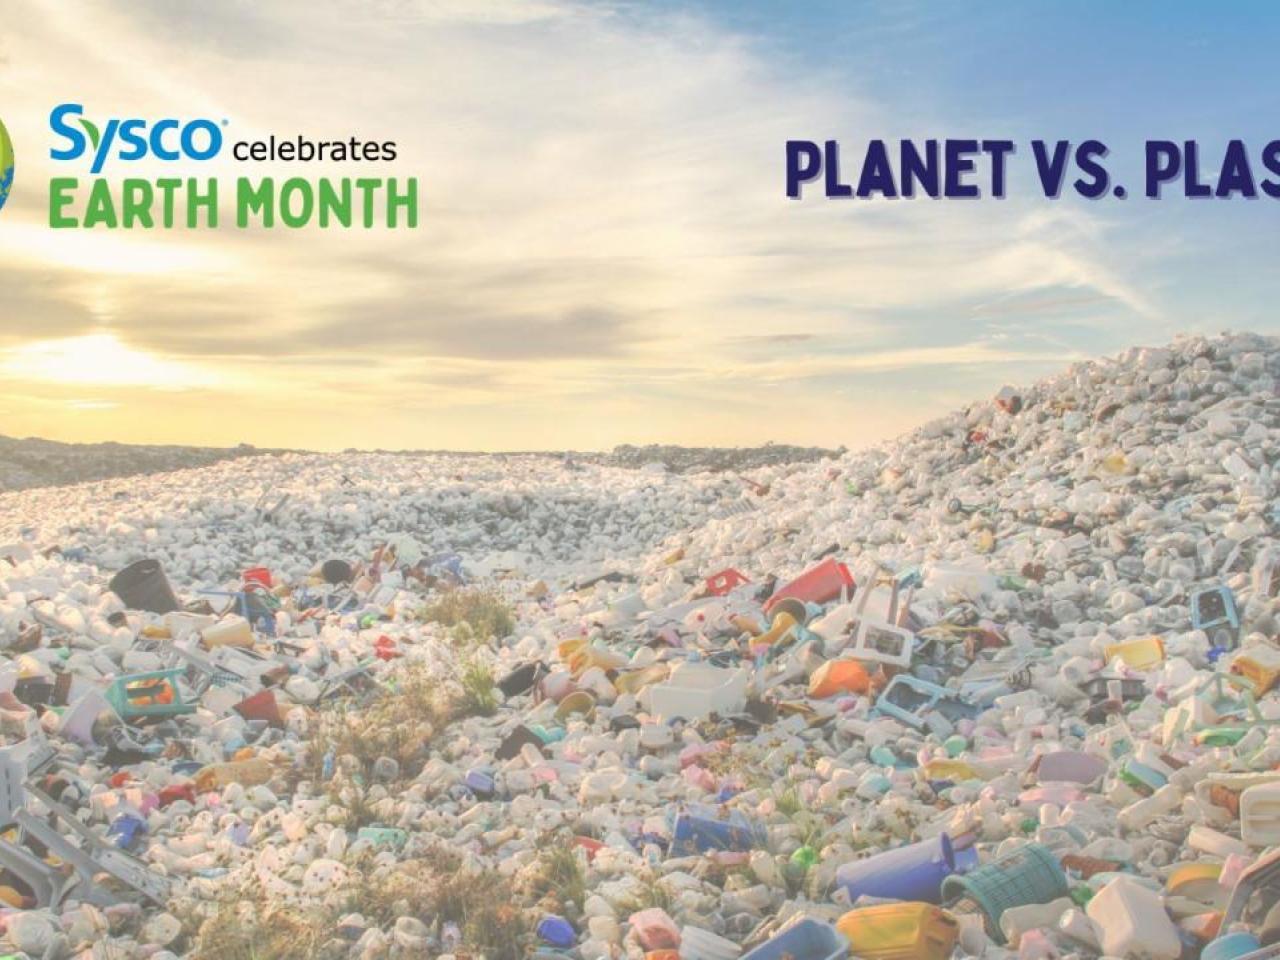 A large pile of plastic waste. Sysco logo in one corner and Planet vs. Plastics in the other.